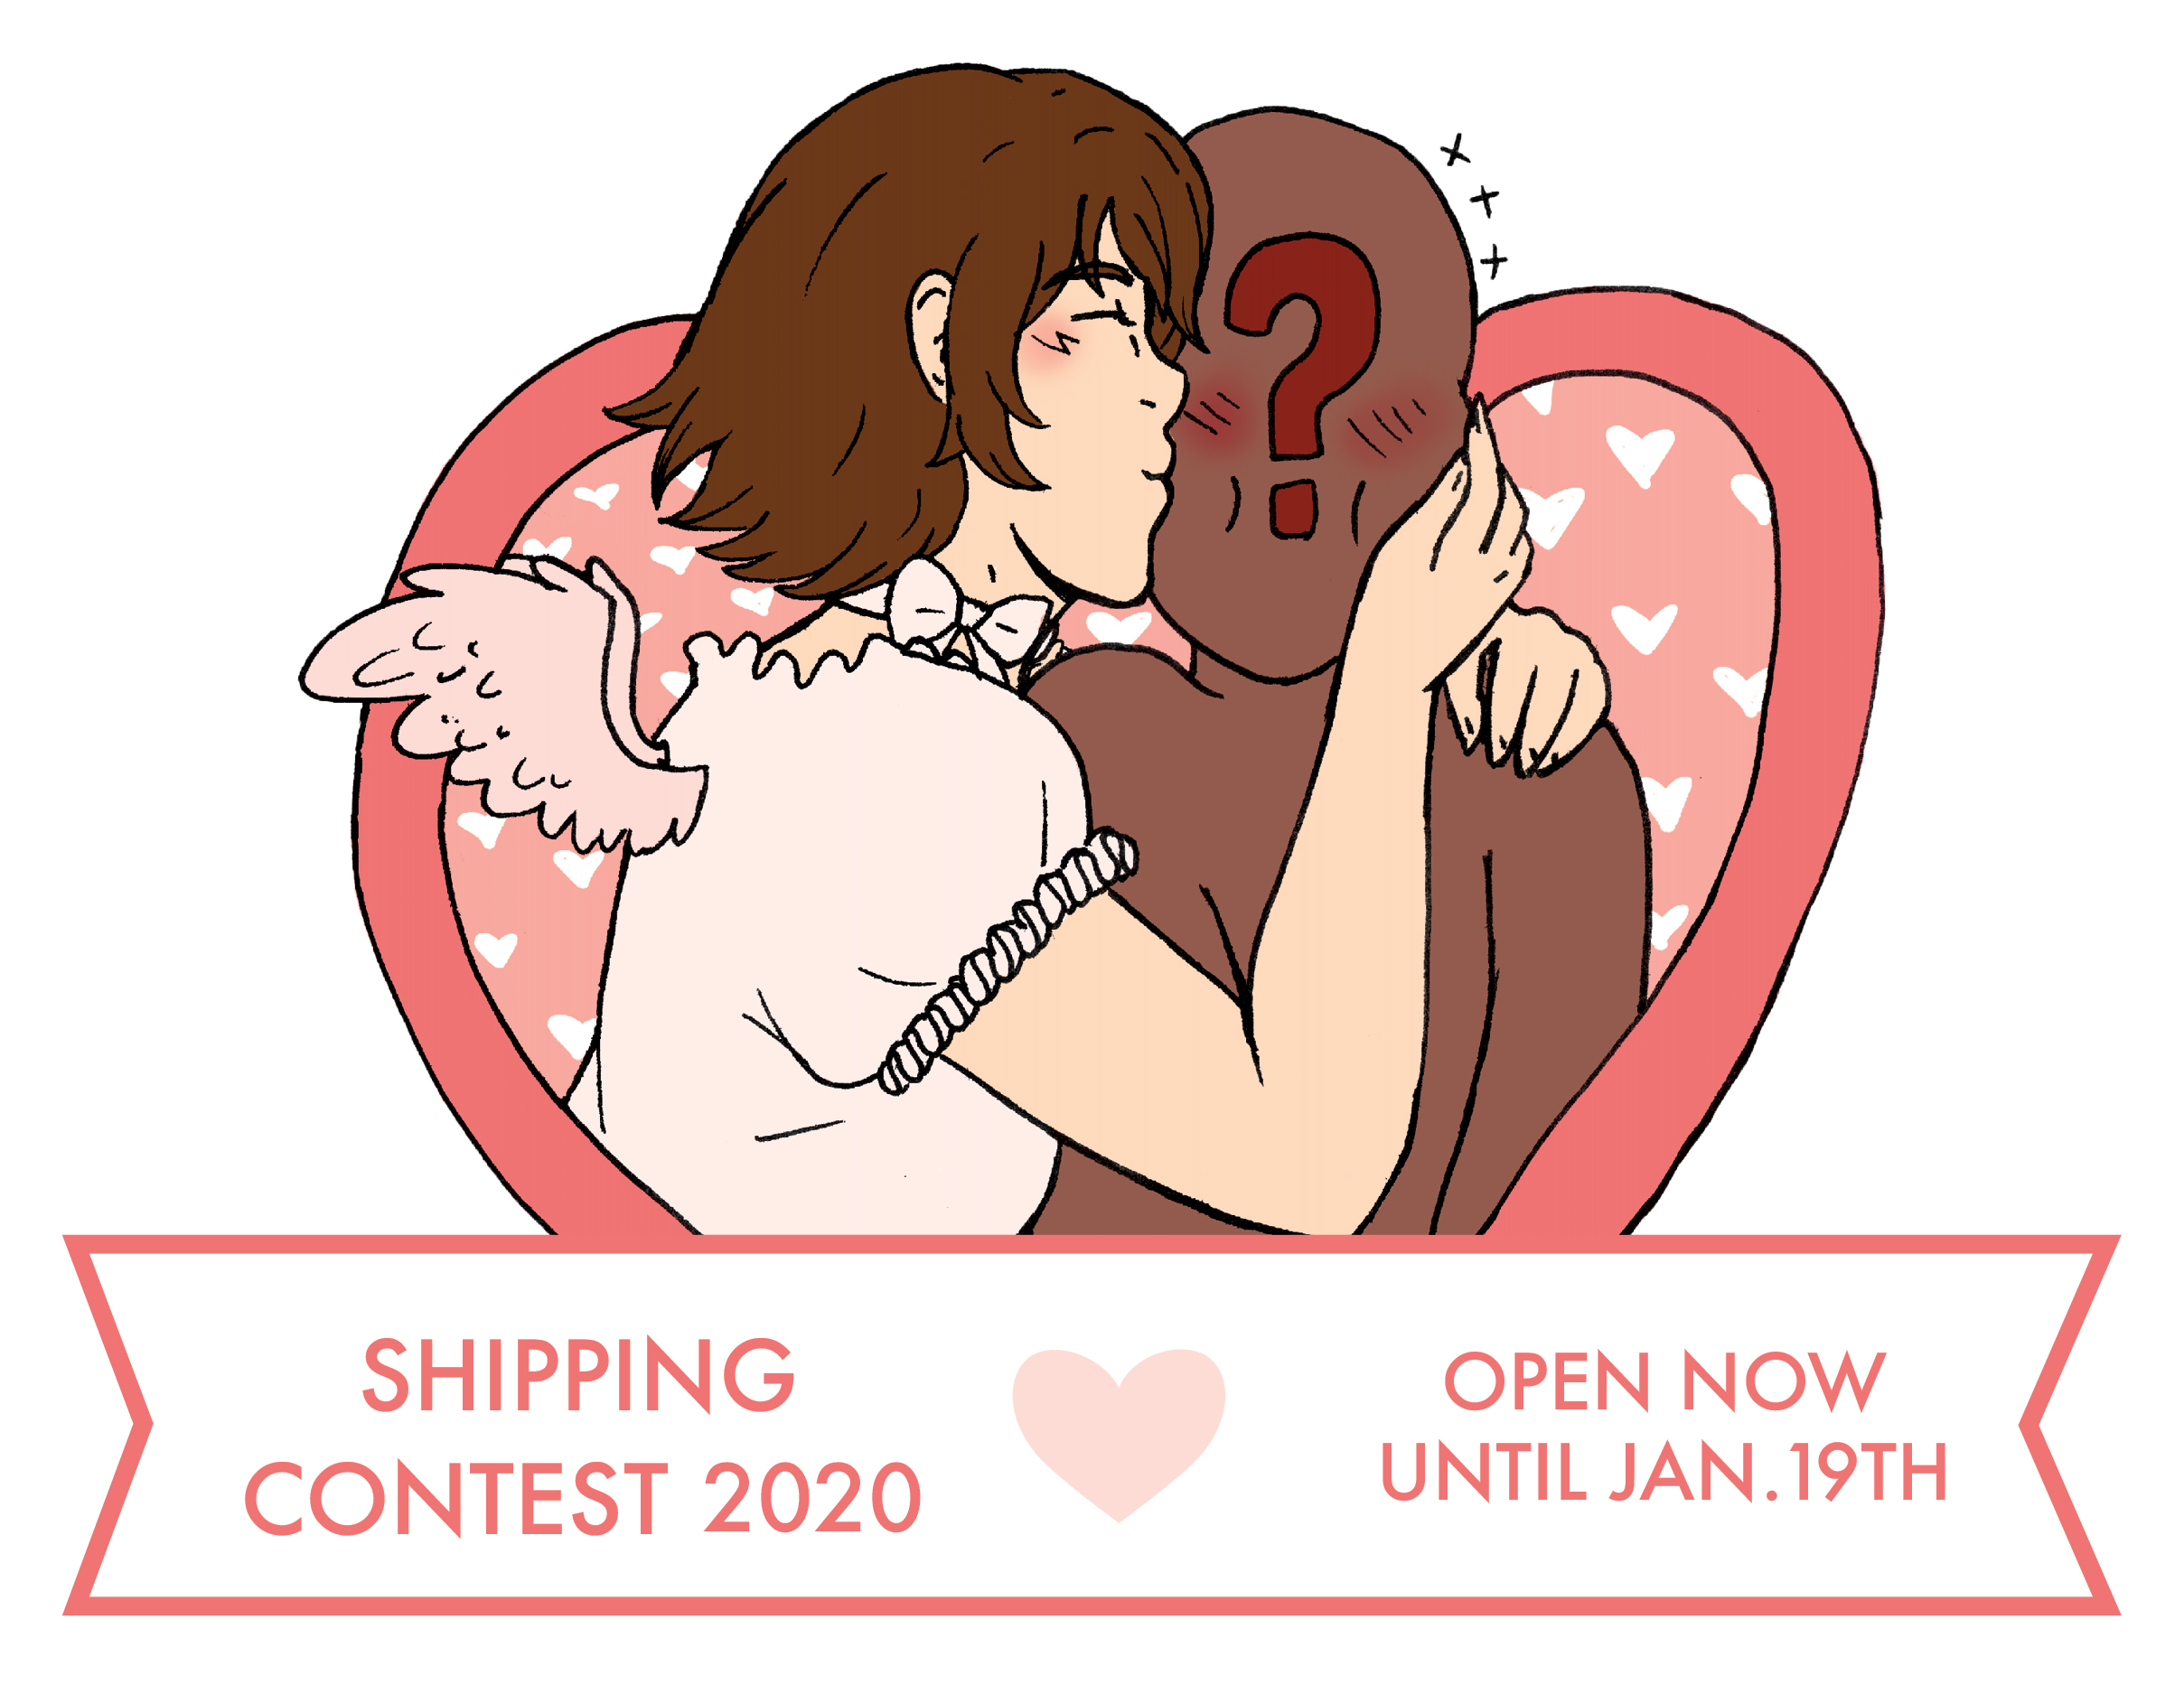 Shipping Contest 2020!